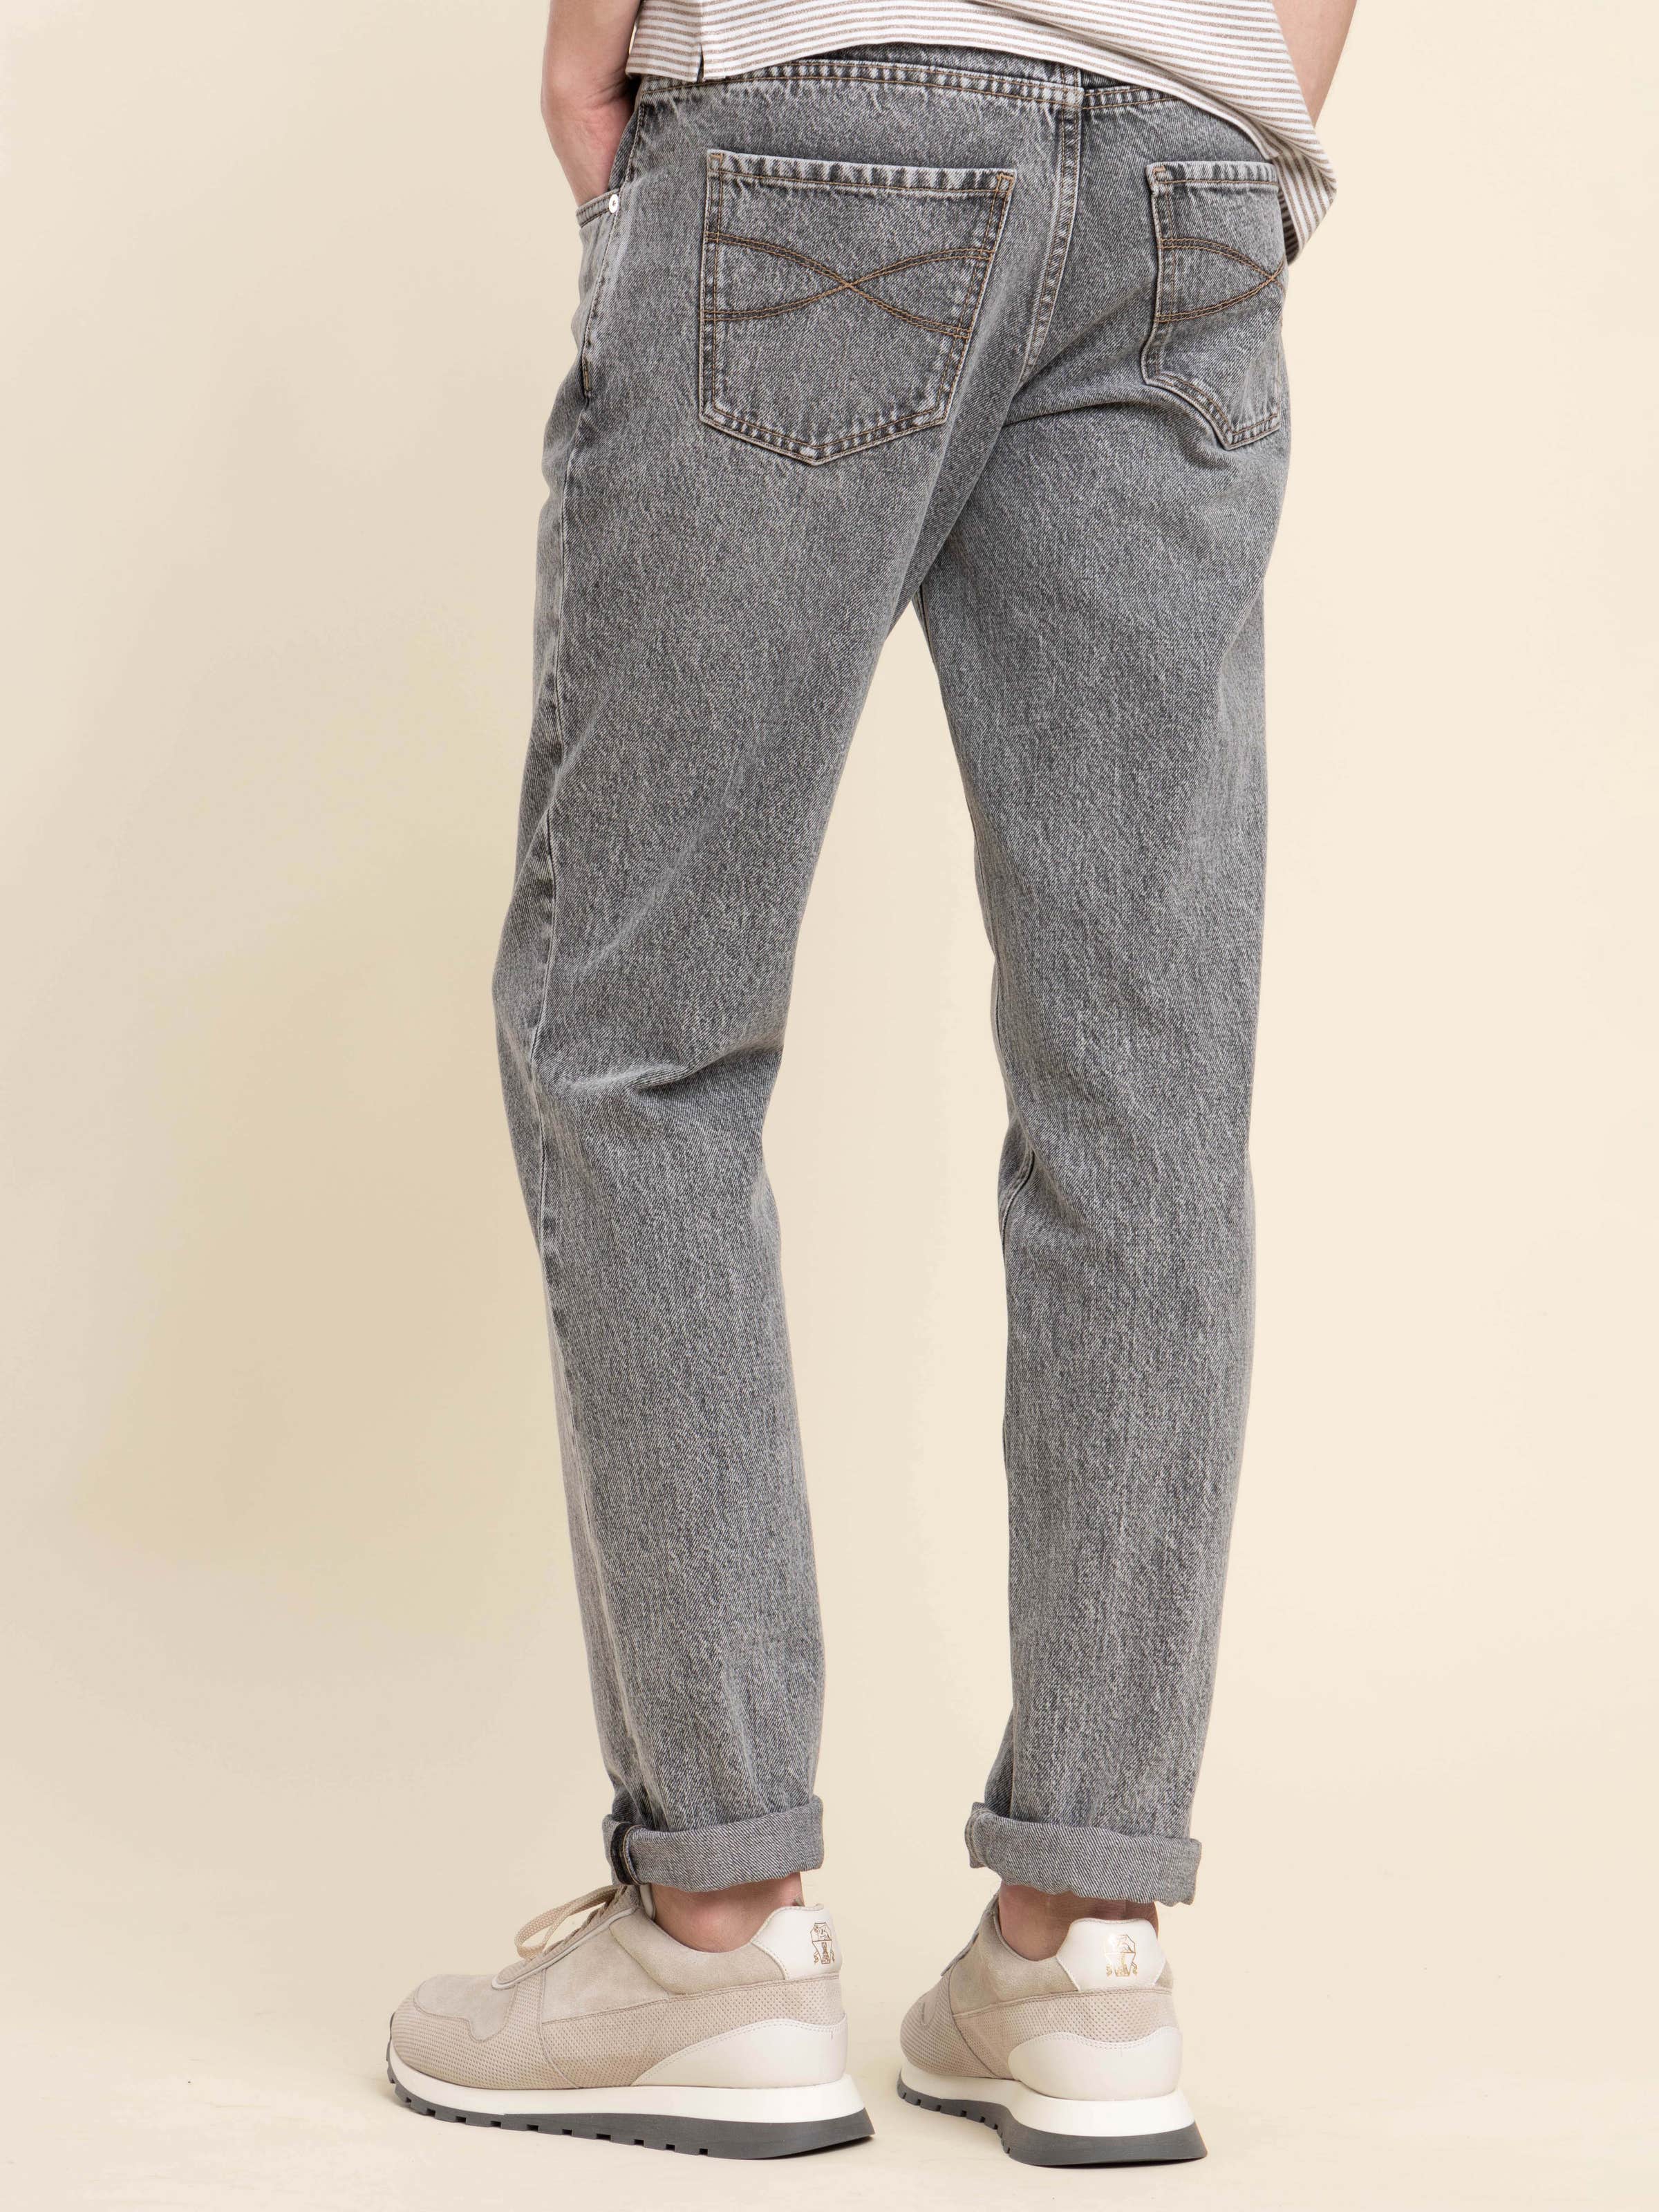 Traditional Five-Pocket in Grey